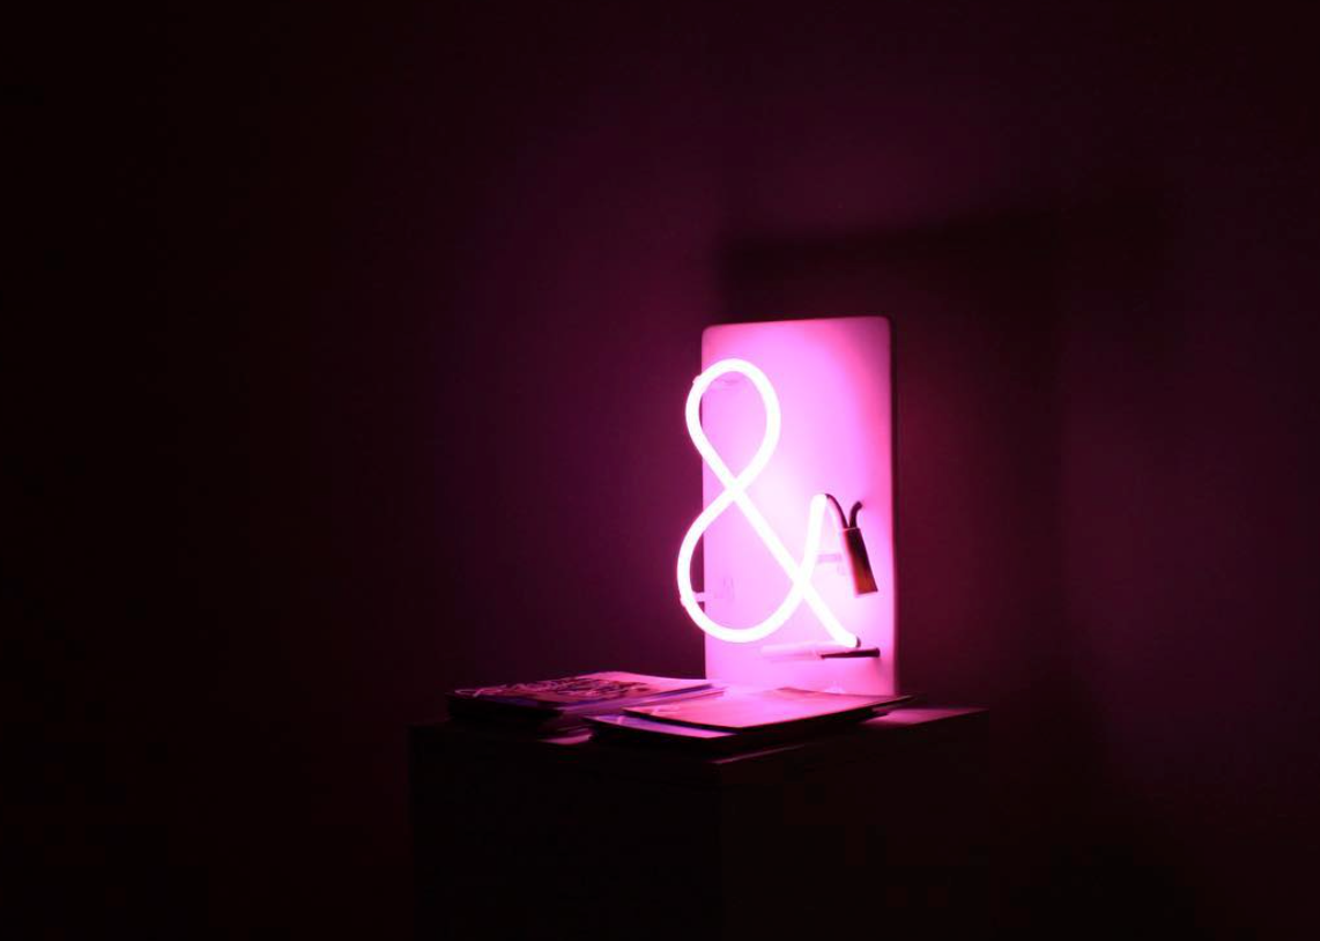 &gallery's glowing ampersand.